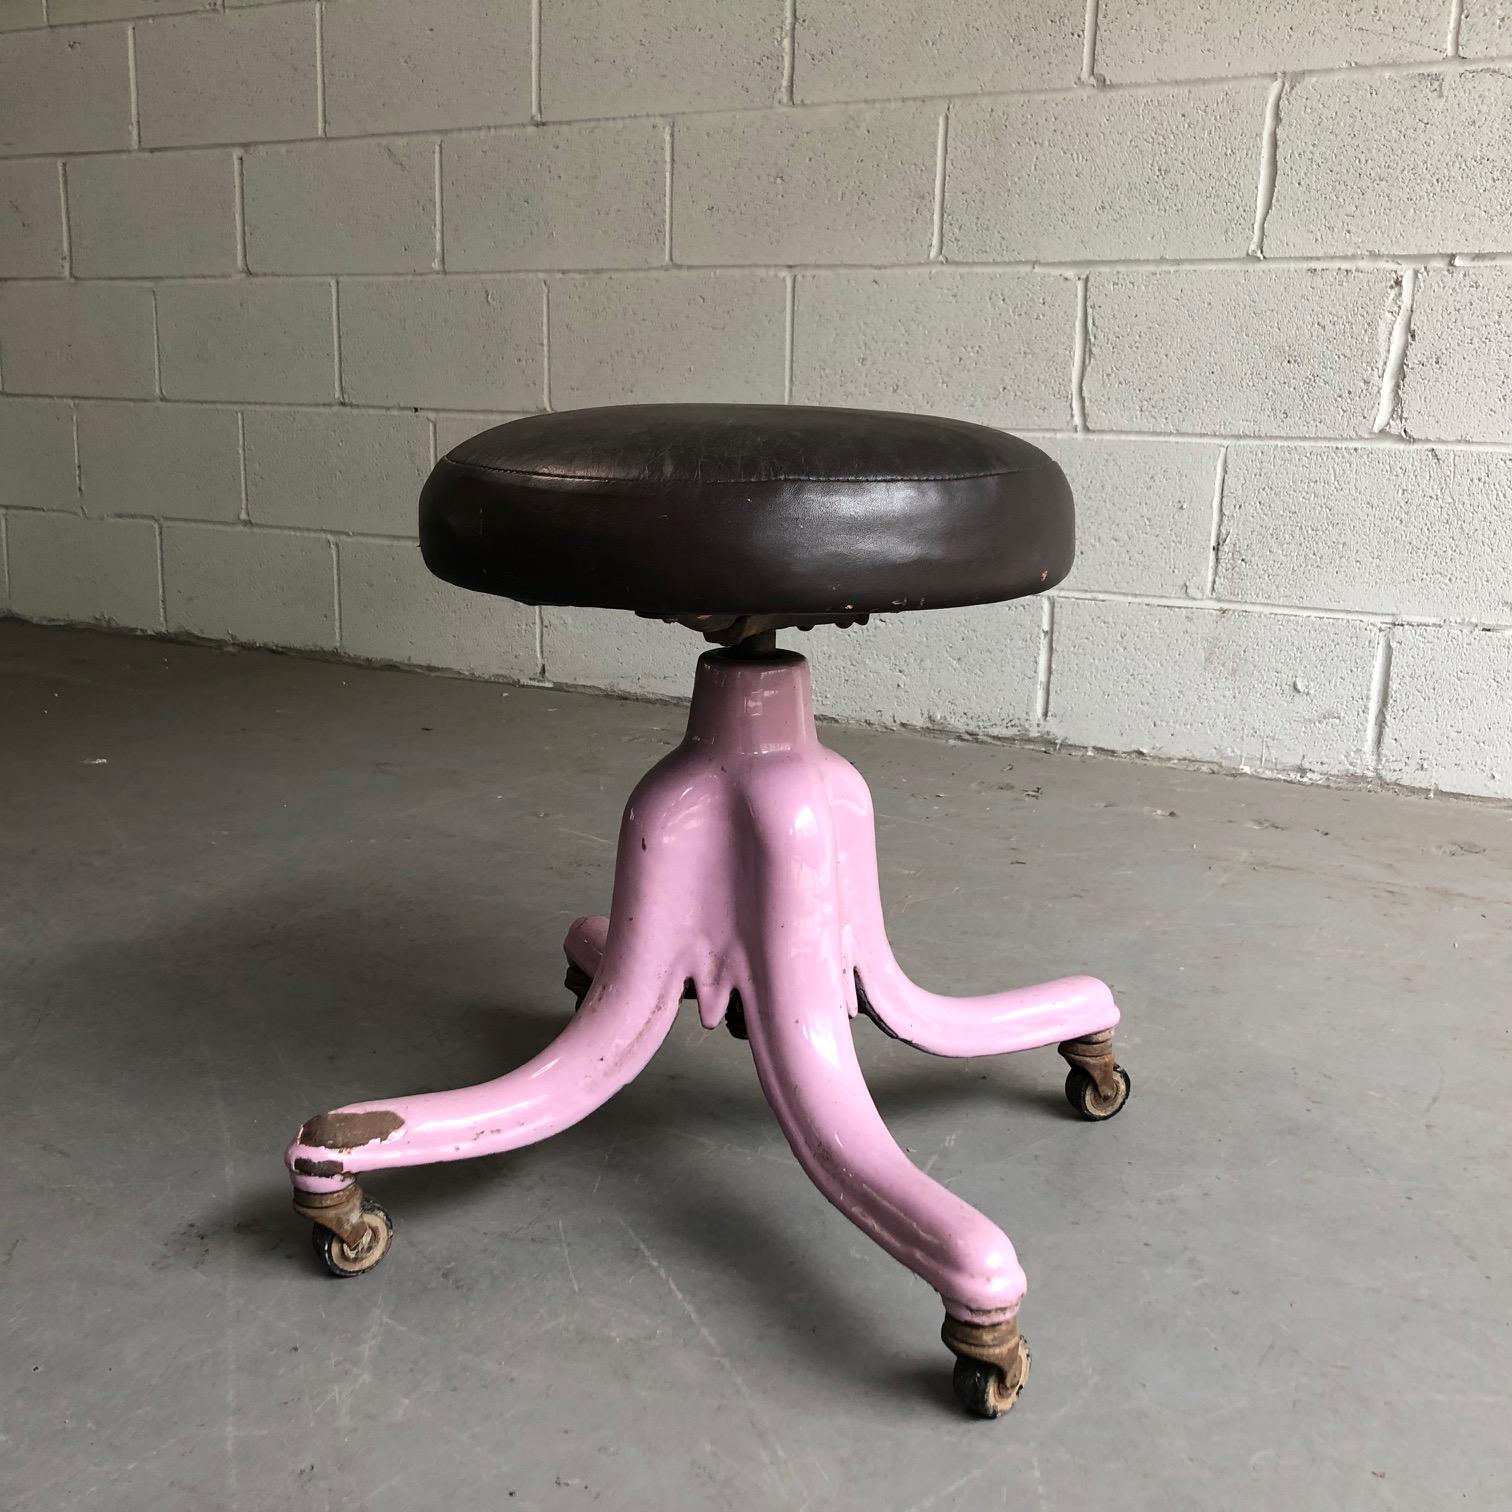 Industrial, rolling, medical stool features a pink hued, baked enamel steel frame with 13.5 inch diameter, dark brown leather seat that is height adjustable from 18-25”.